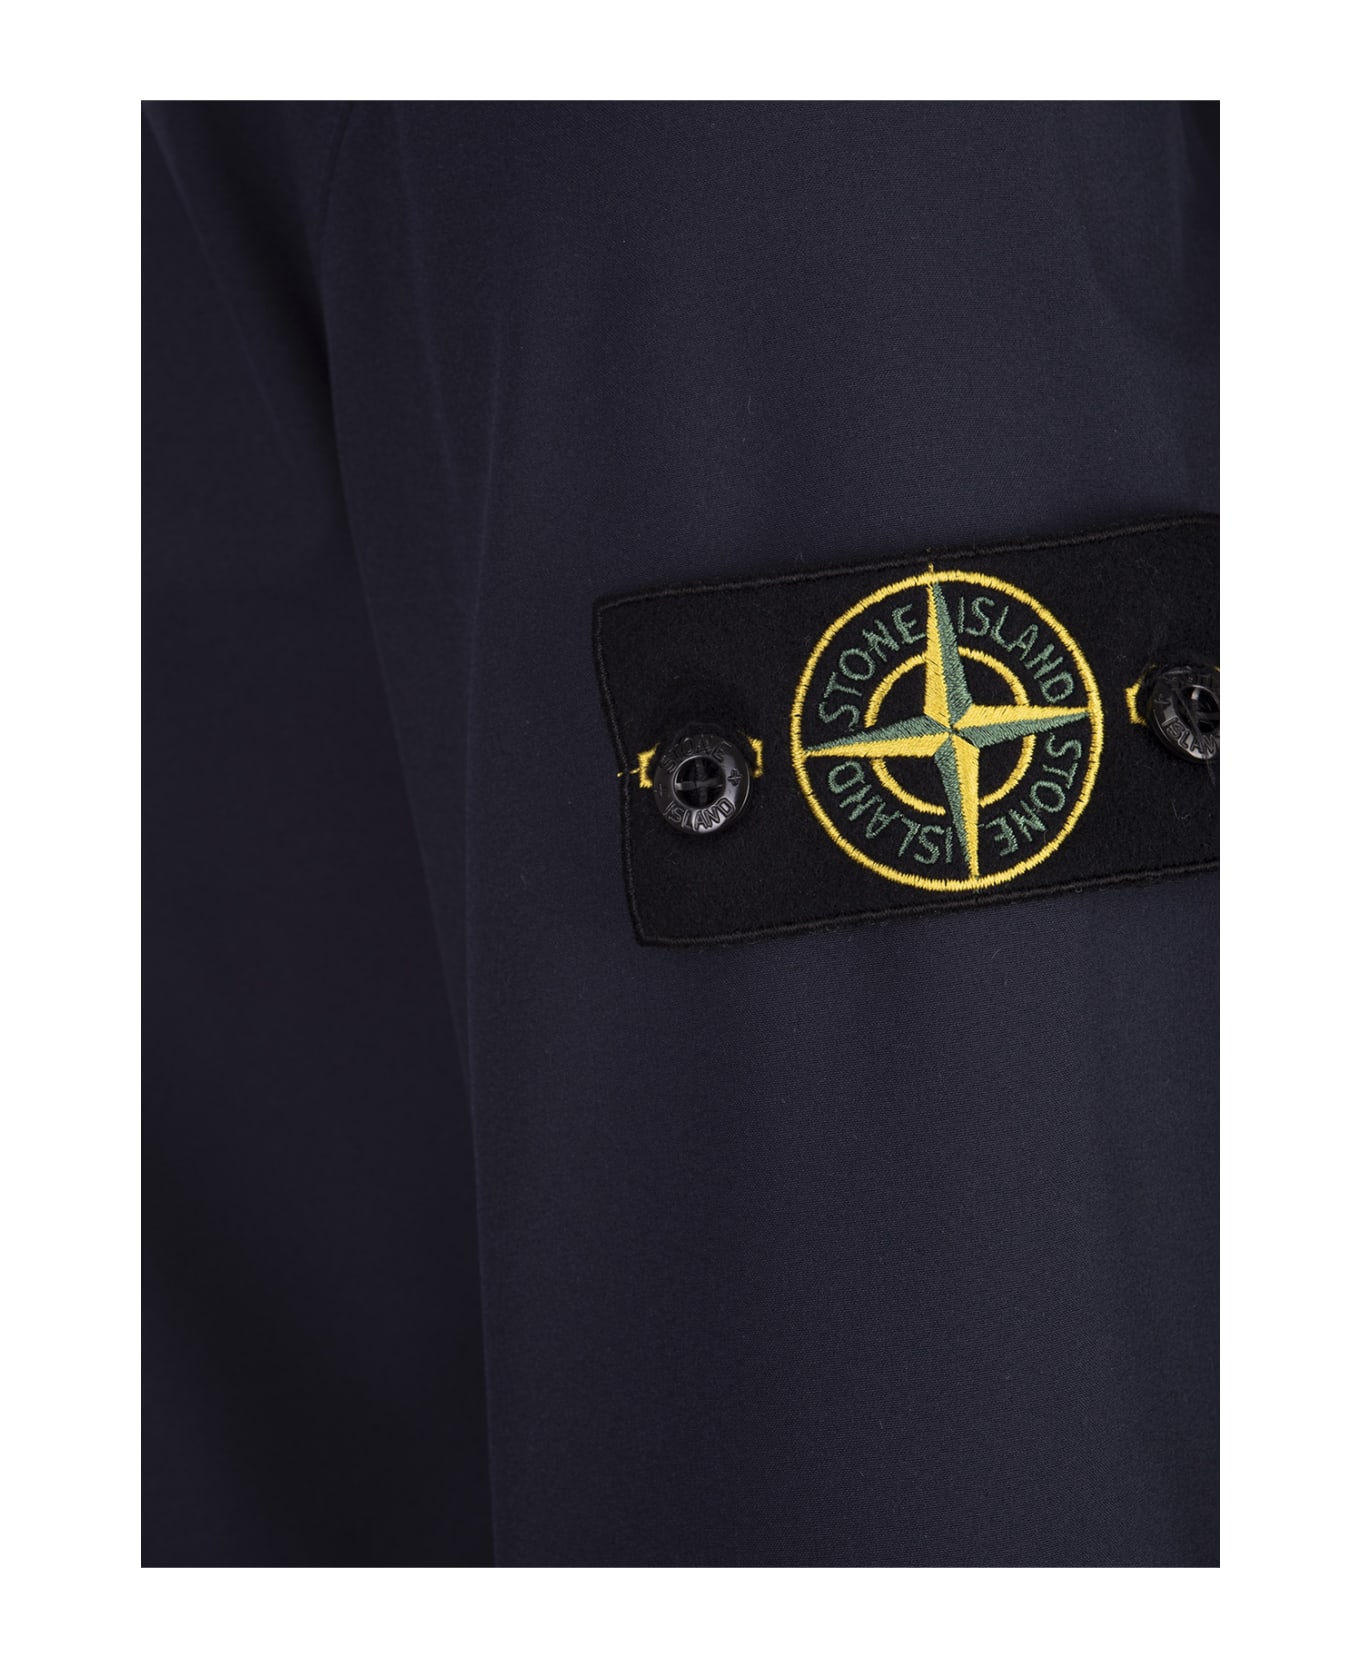 Stone Island Light Soft Shell-r_e.dye Jacket In Navy Blue Recycled Polyester - Blue